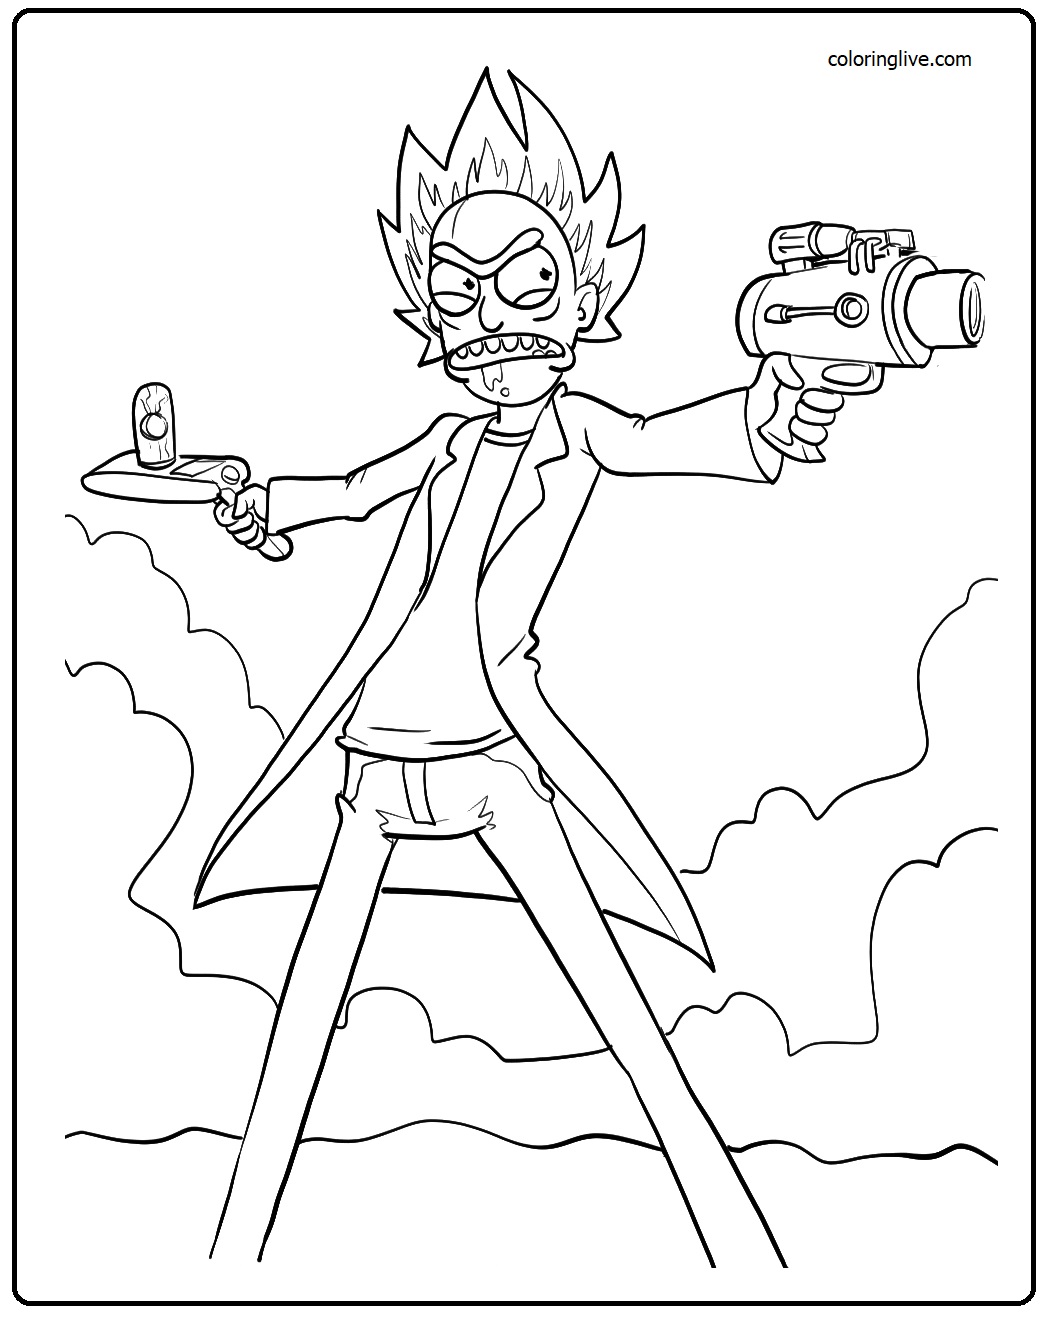 Printable Rick and Morty  sheet Coloring Page for kids.